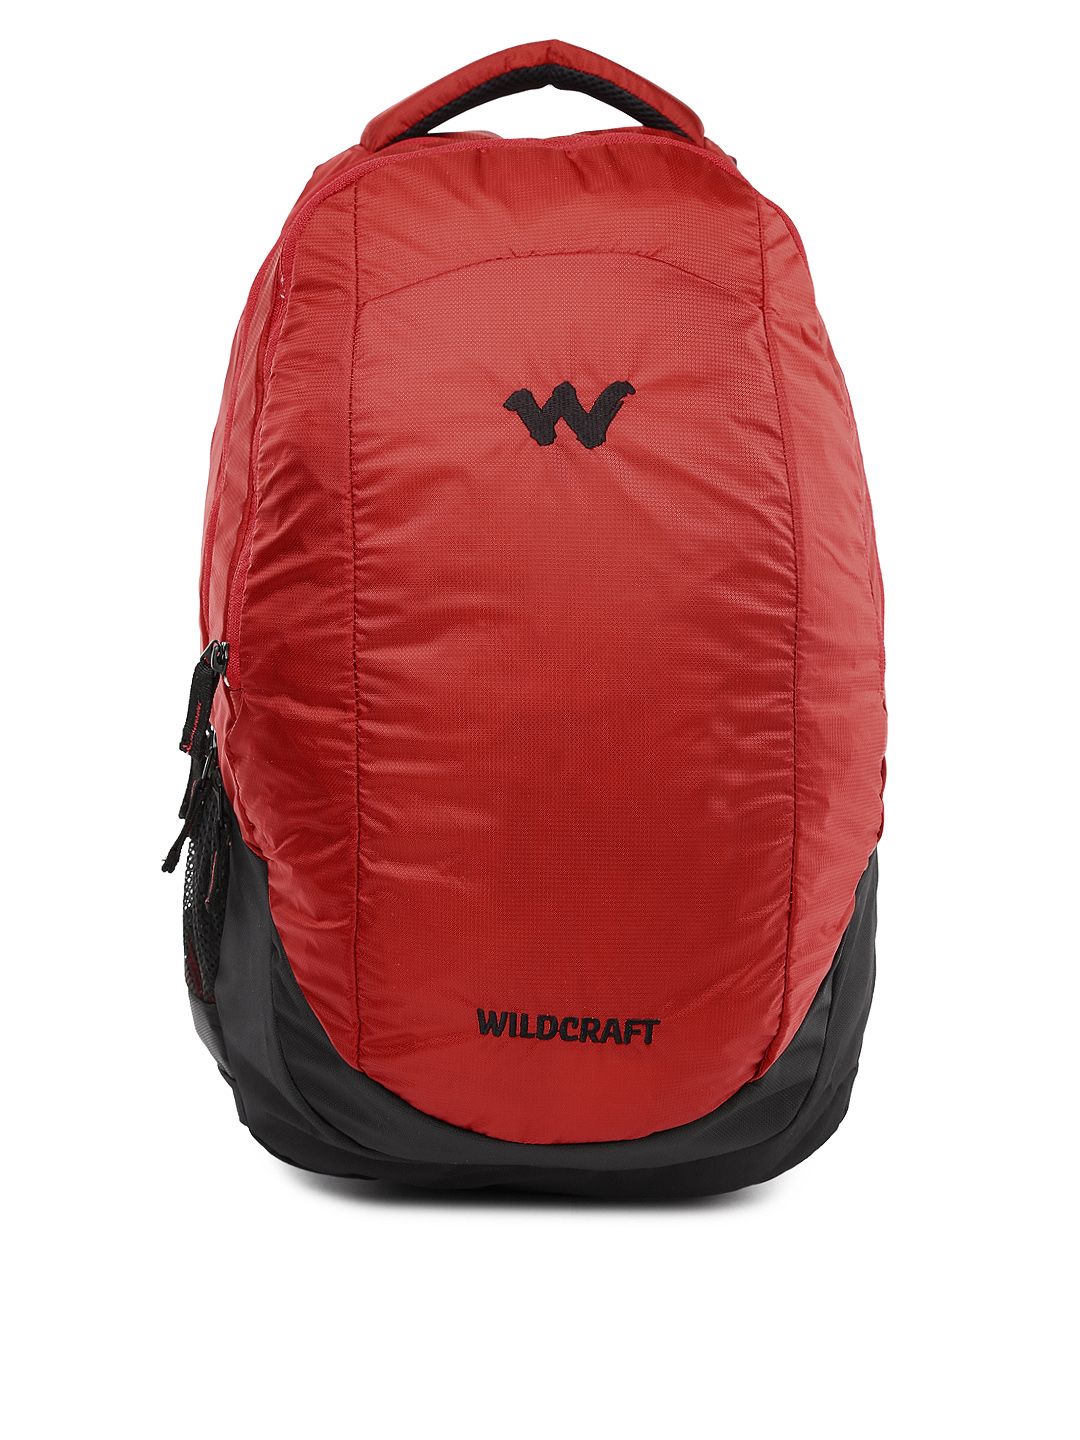 Wildcraft Unisex Red & Black Peza Backpack Price in India